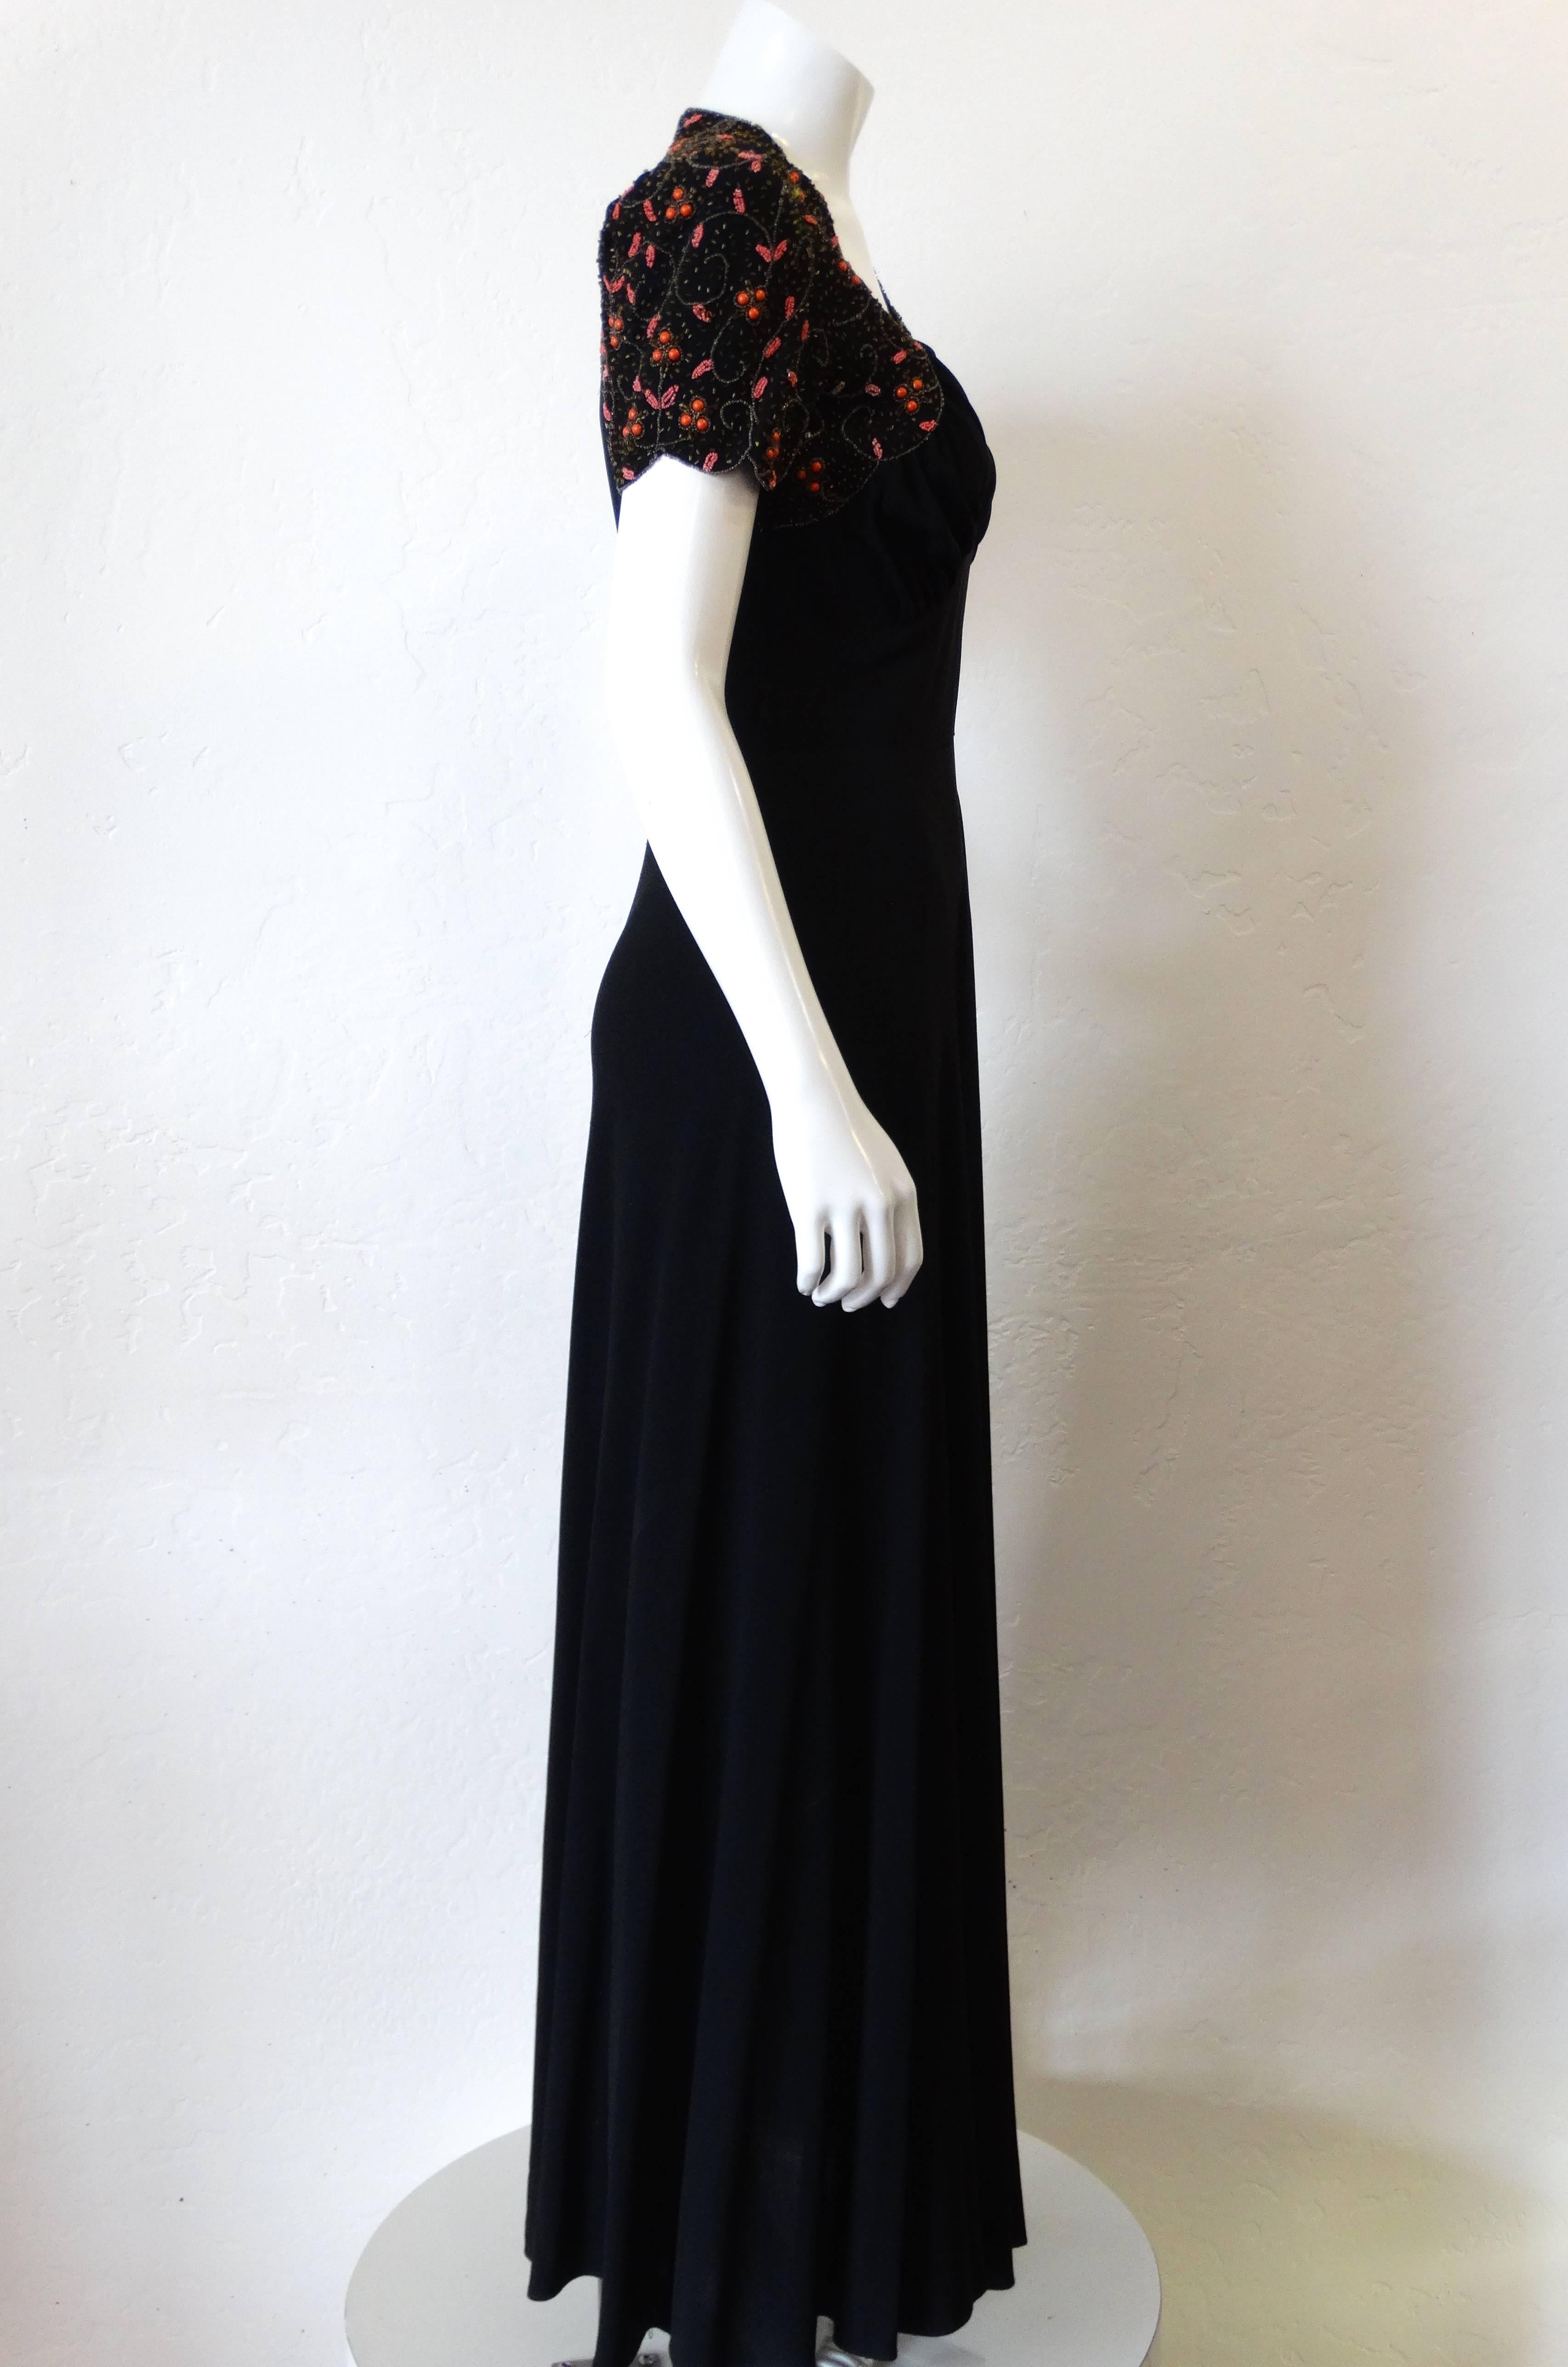 The most amazing 1940s glass beaded gown! Classic 40s silhouette with short sleeves and sweetheart neckline. Slightly sheer black Rayon with orange and pink botanical beading on the shoulders. Flattering ruched bustline. Zips up the side. Fits a